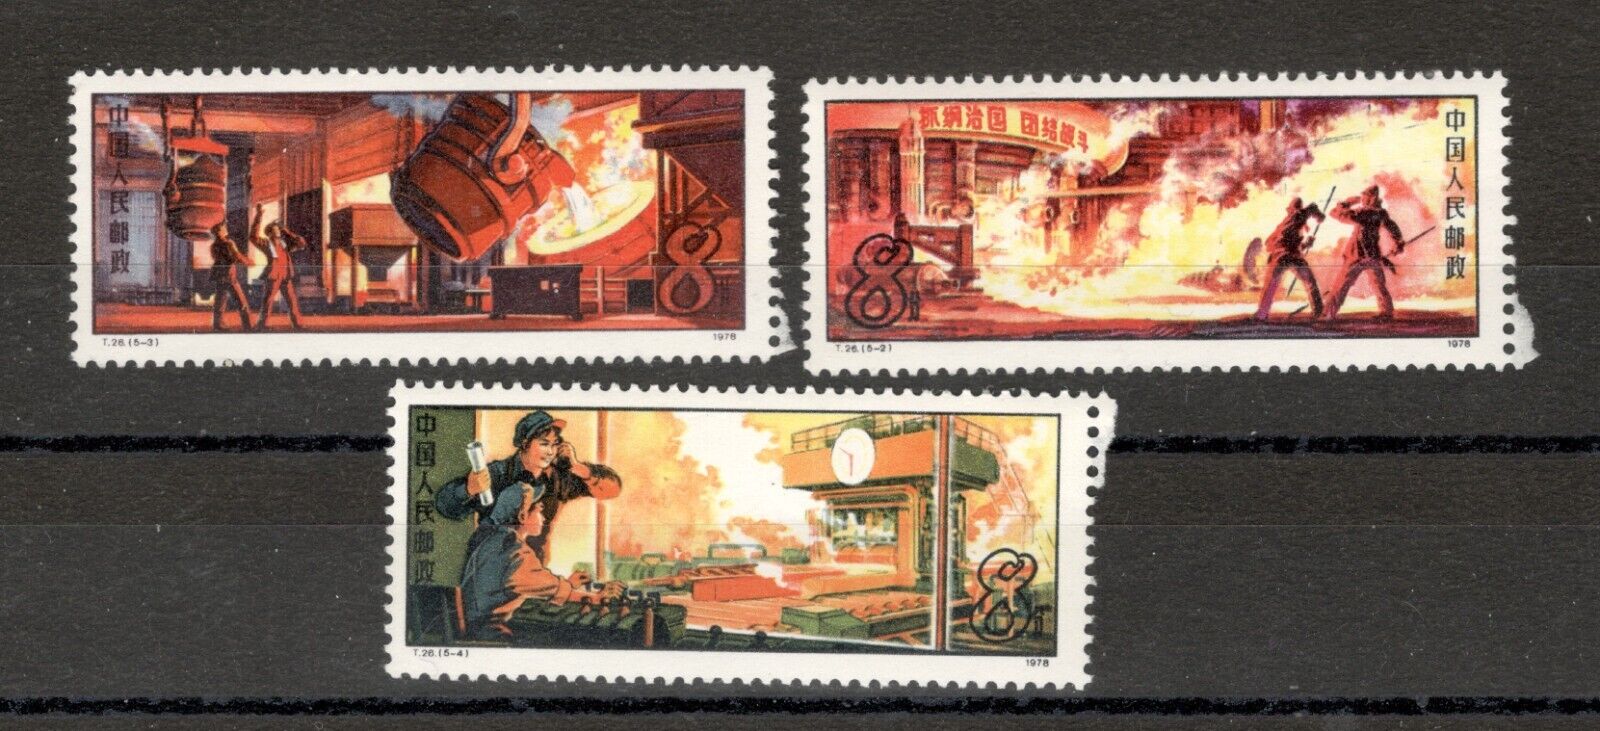 CHINA - 3 MNH STAMPS, IRON AND STEEL INDUSTRY - 1978.